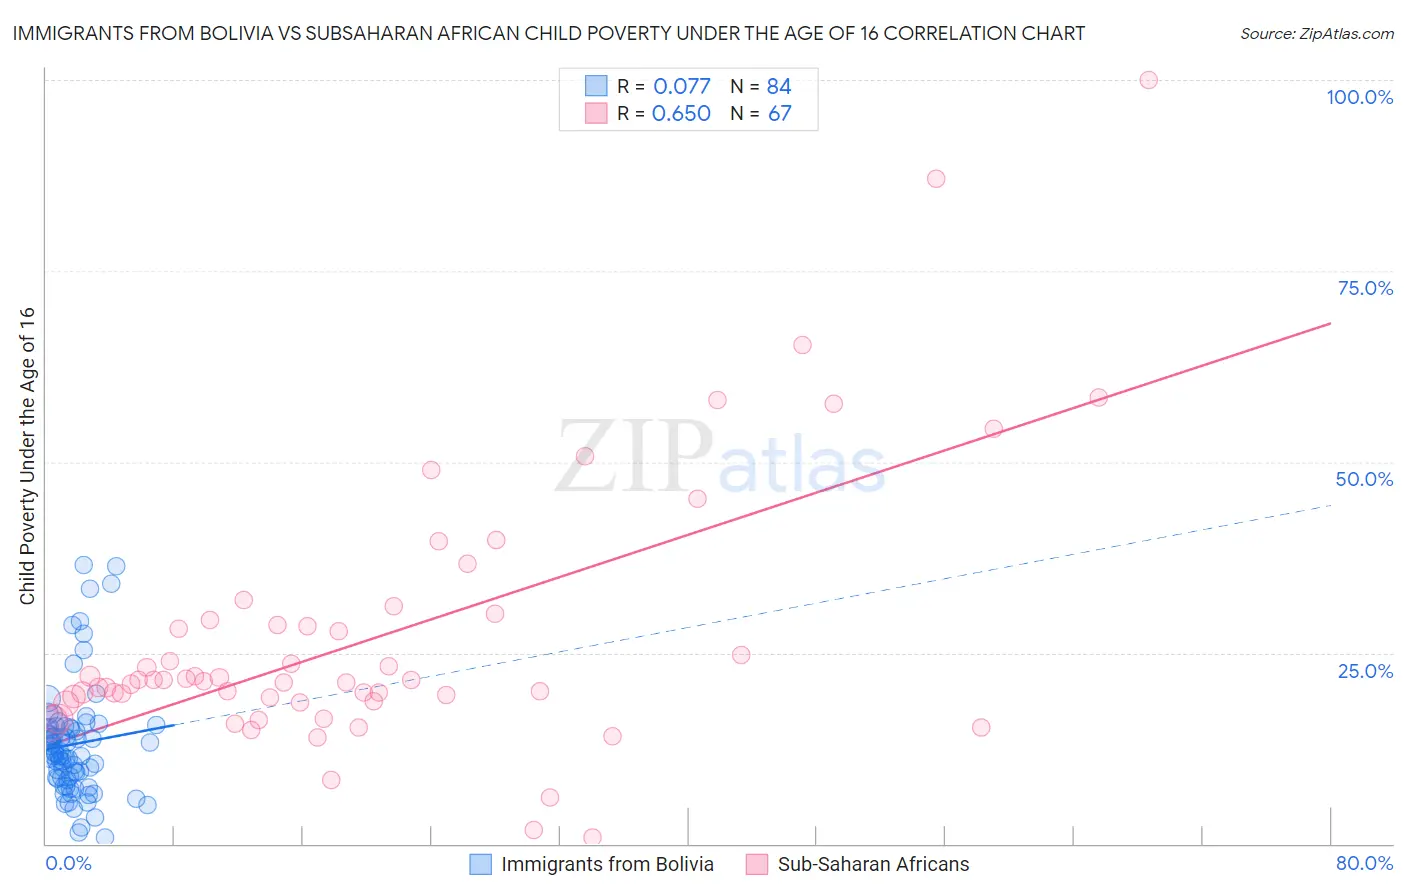 Immigrants from Bolivia vs Subsaharan African Child Poverty Under the Age of 16